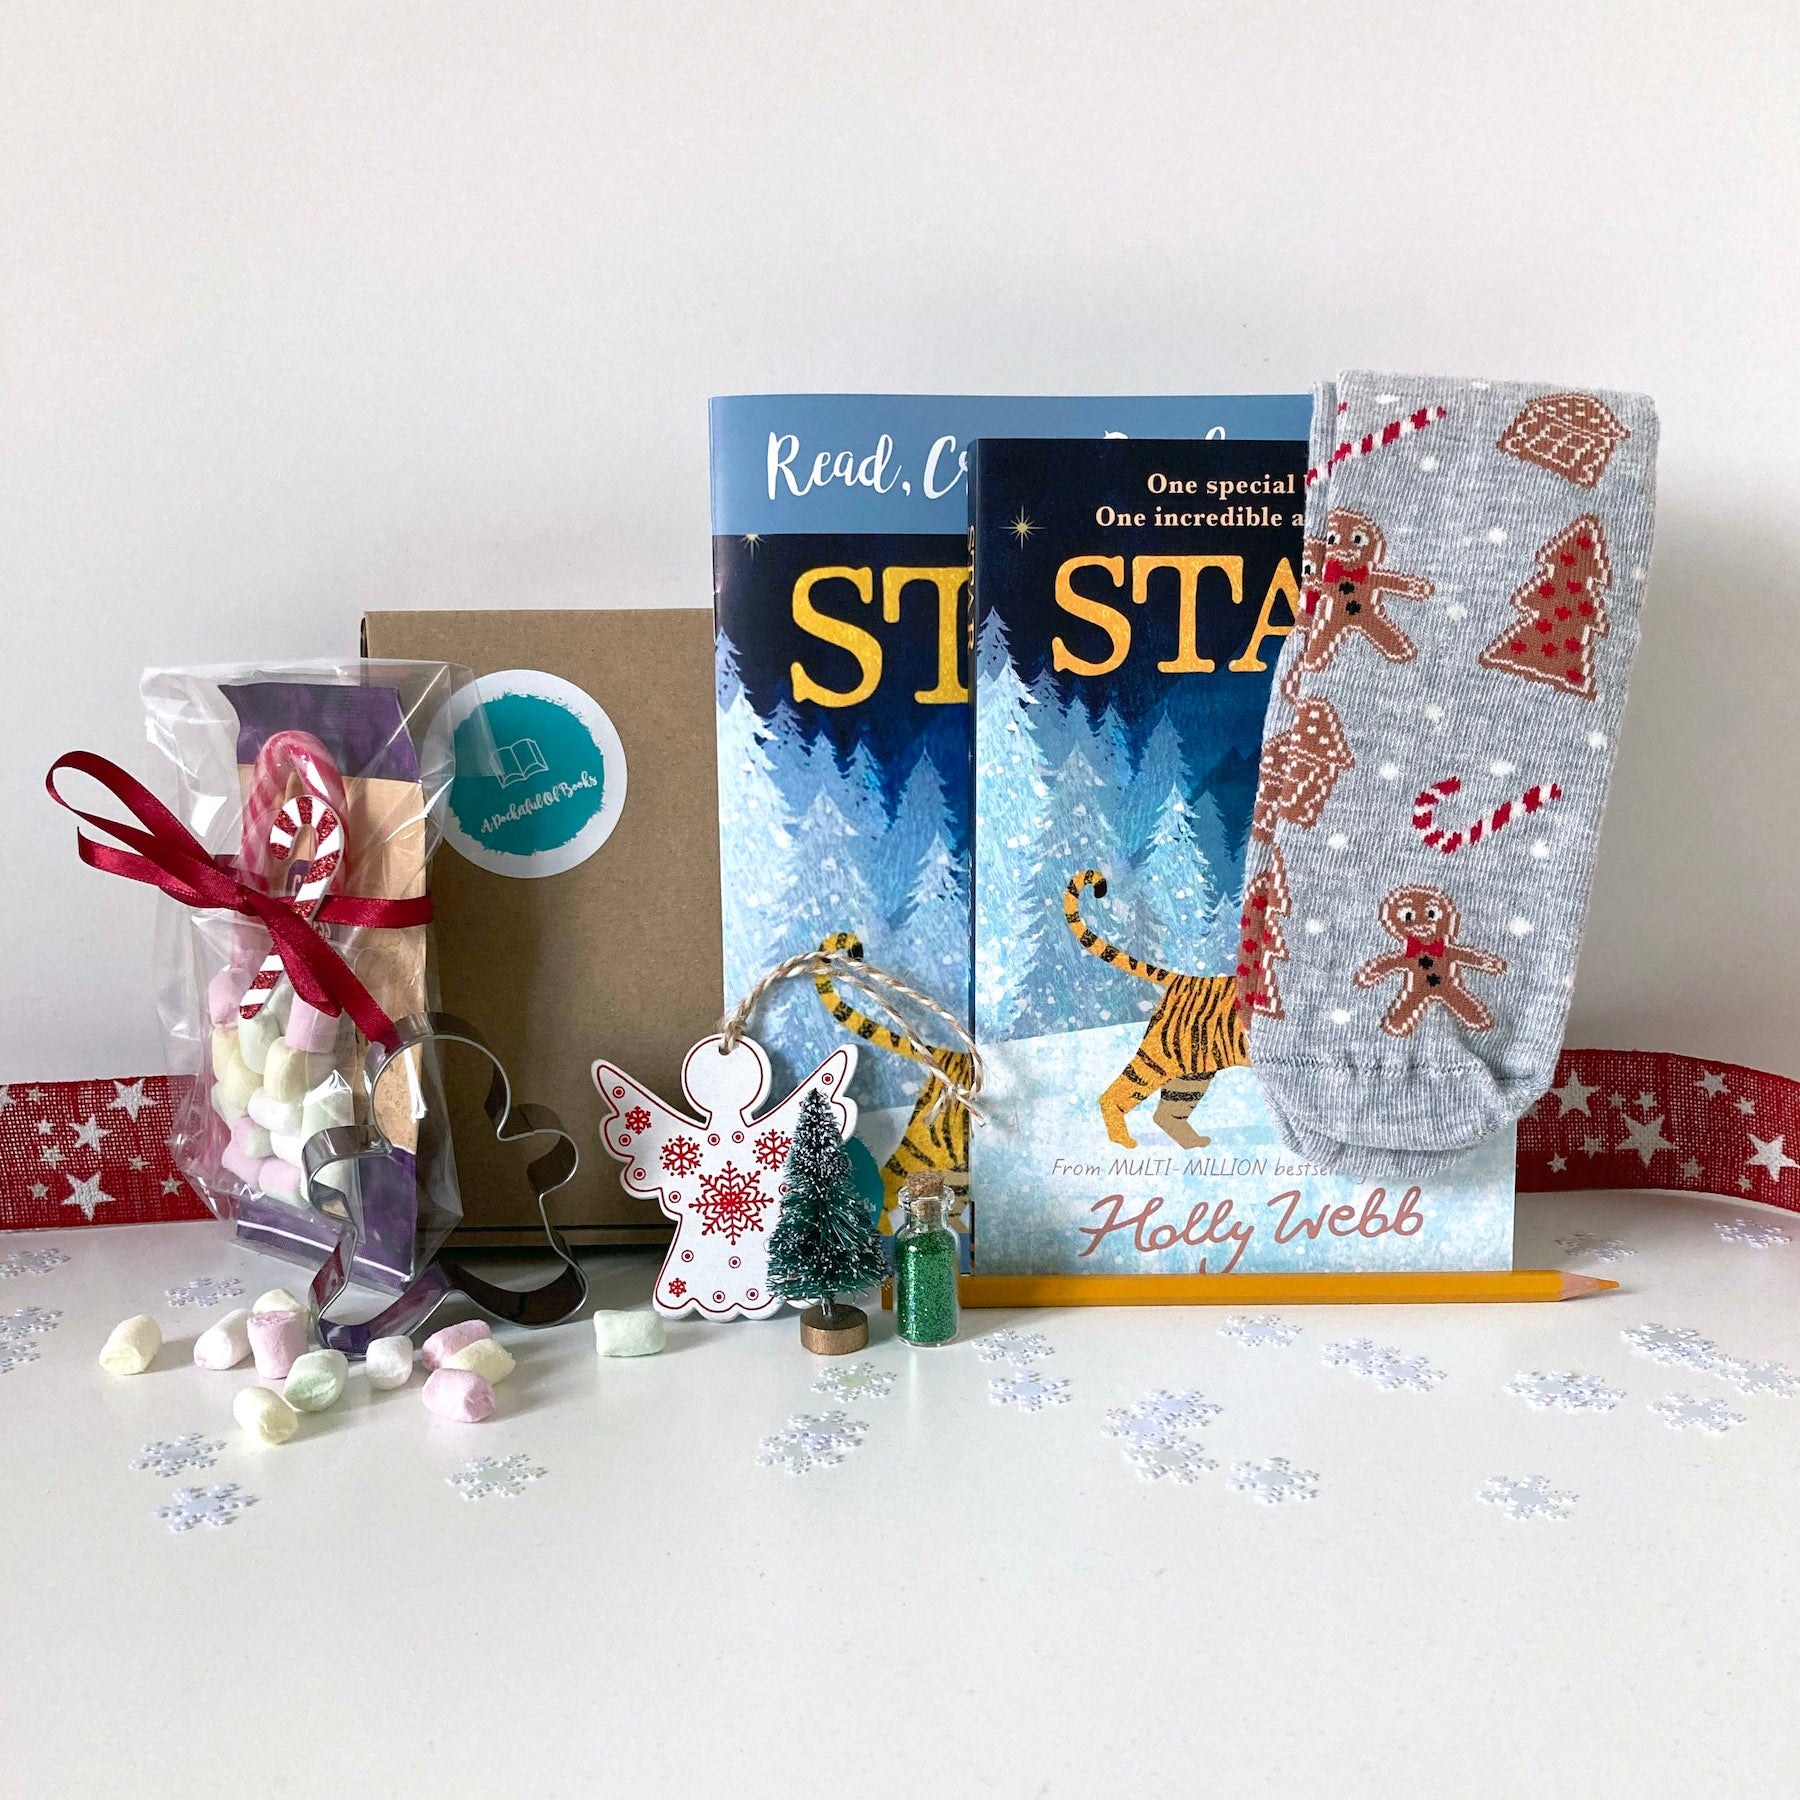 Christmas Eve Box from A Pocketful Of Books, Christmas gift idea for kids